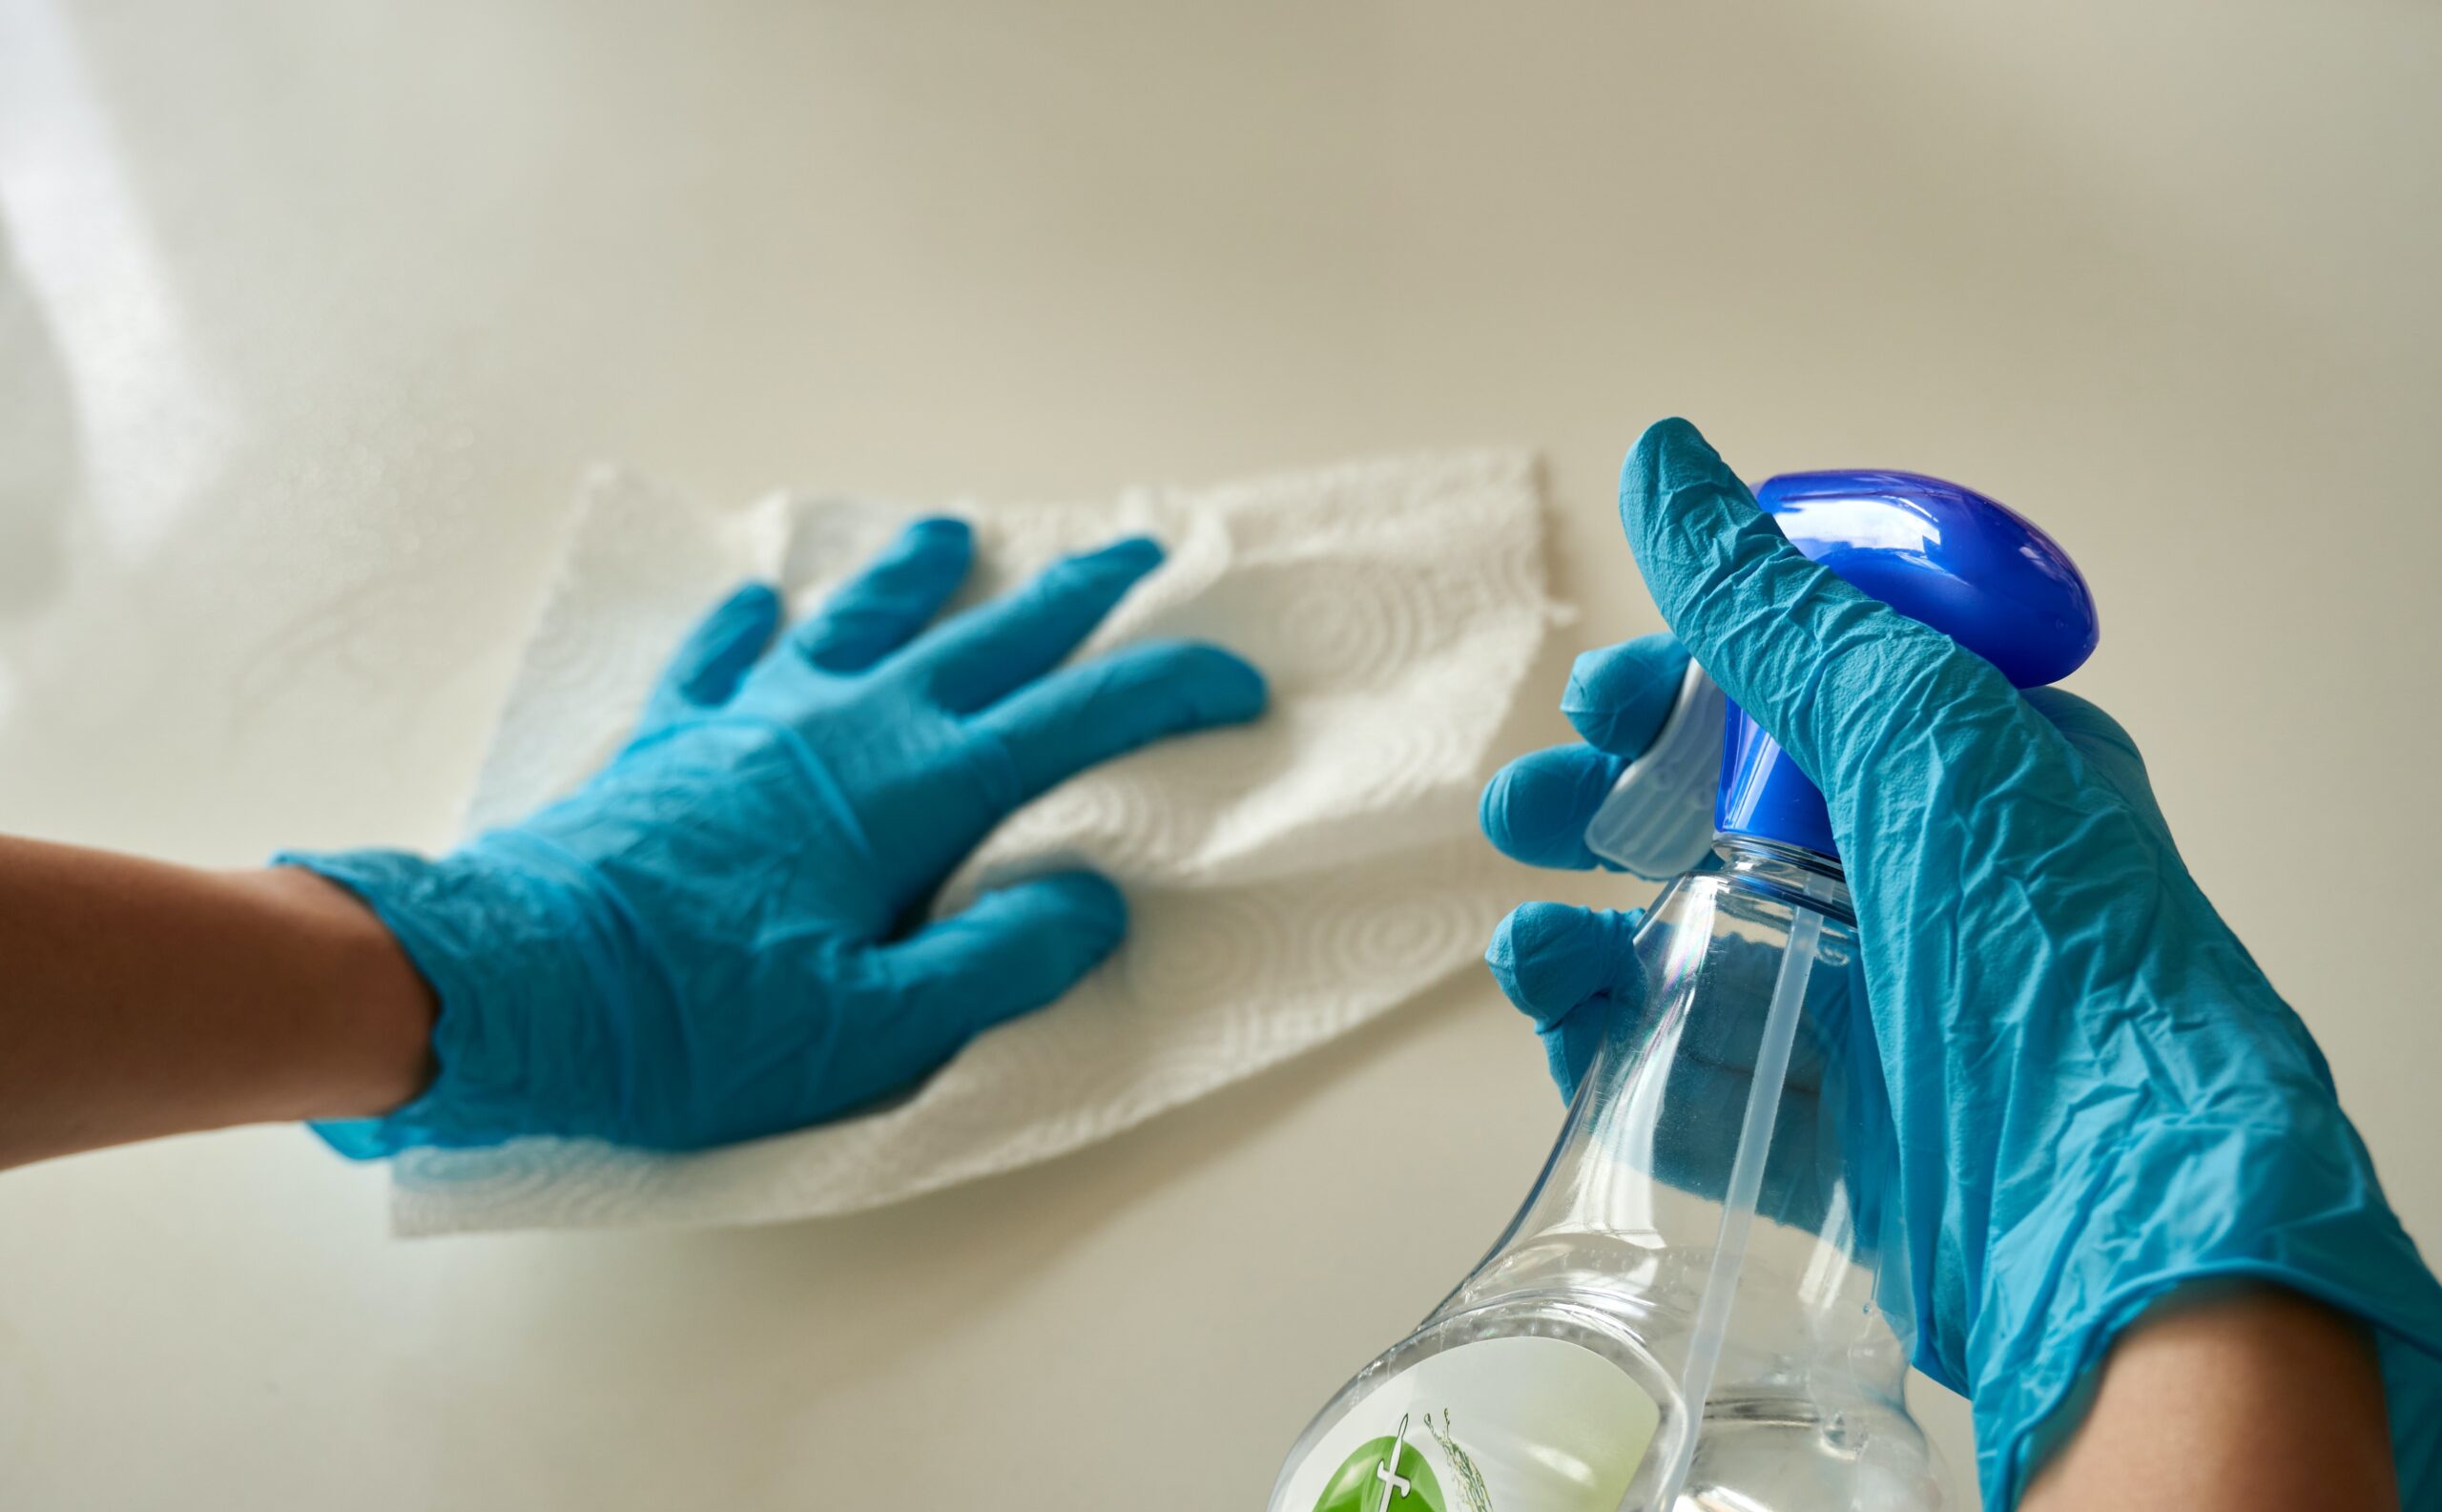 When cleaning, use rubber gloves and use white paper towel.